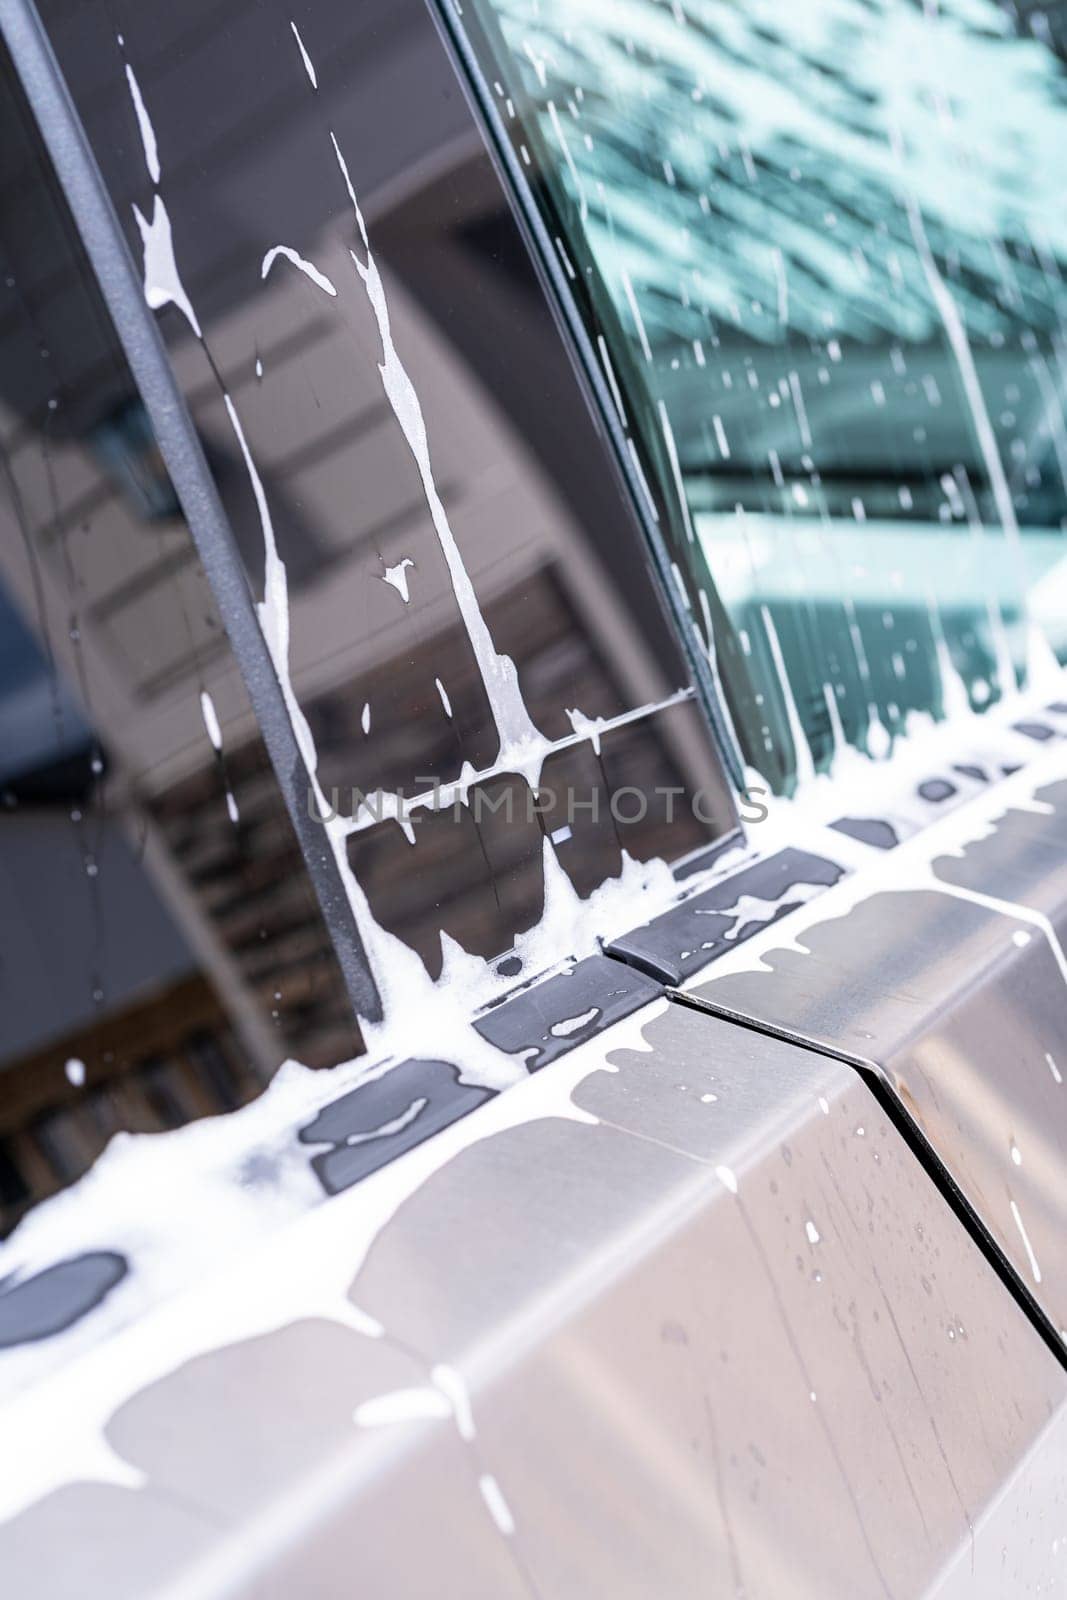 Soap Suds Flowing Down Tesla Cybertruck During Wash by arinahabich